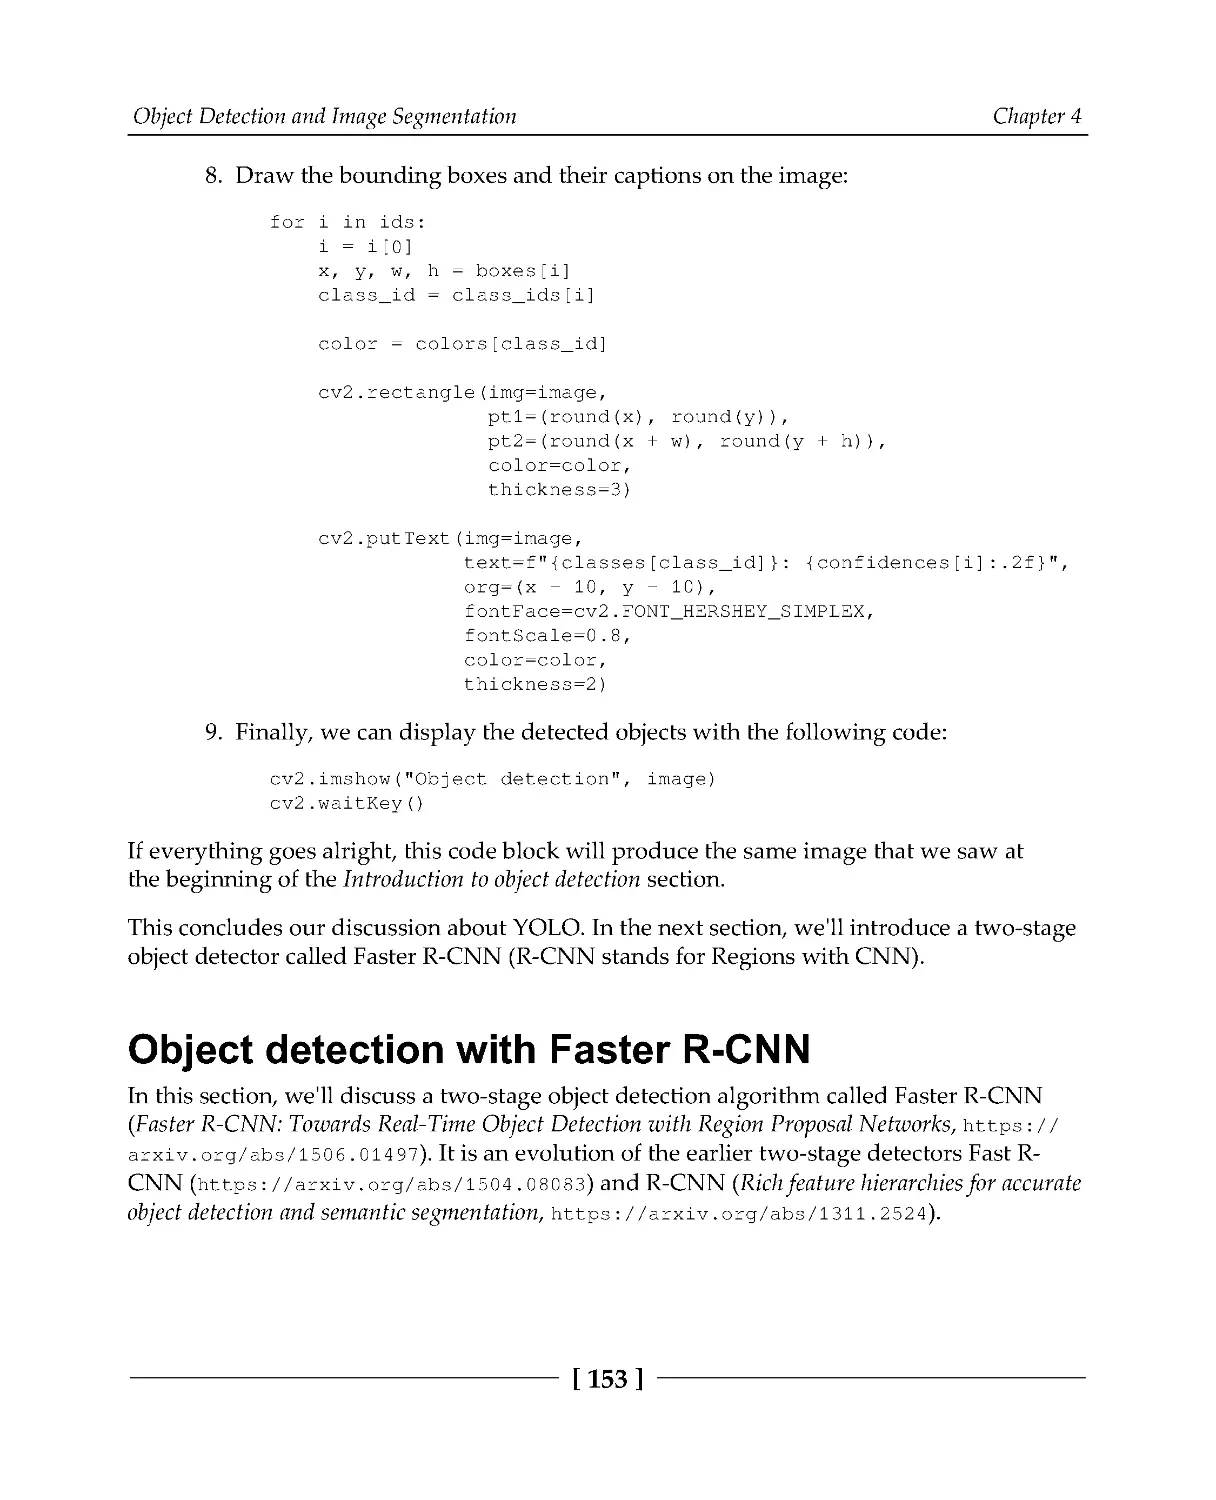 Object detection with Faster R-CNN